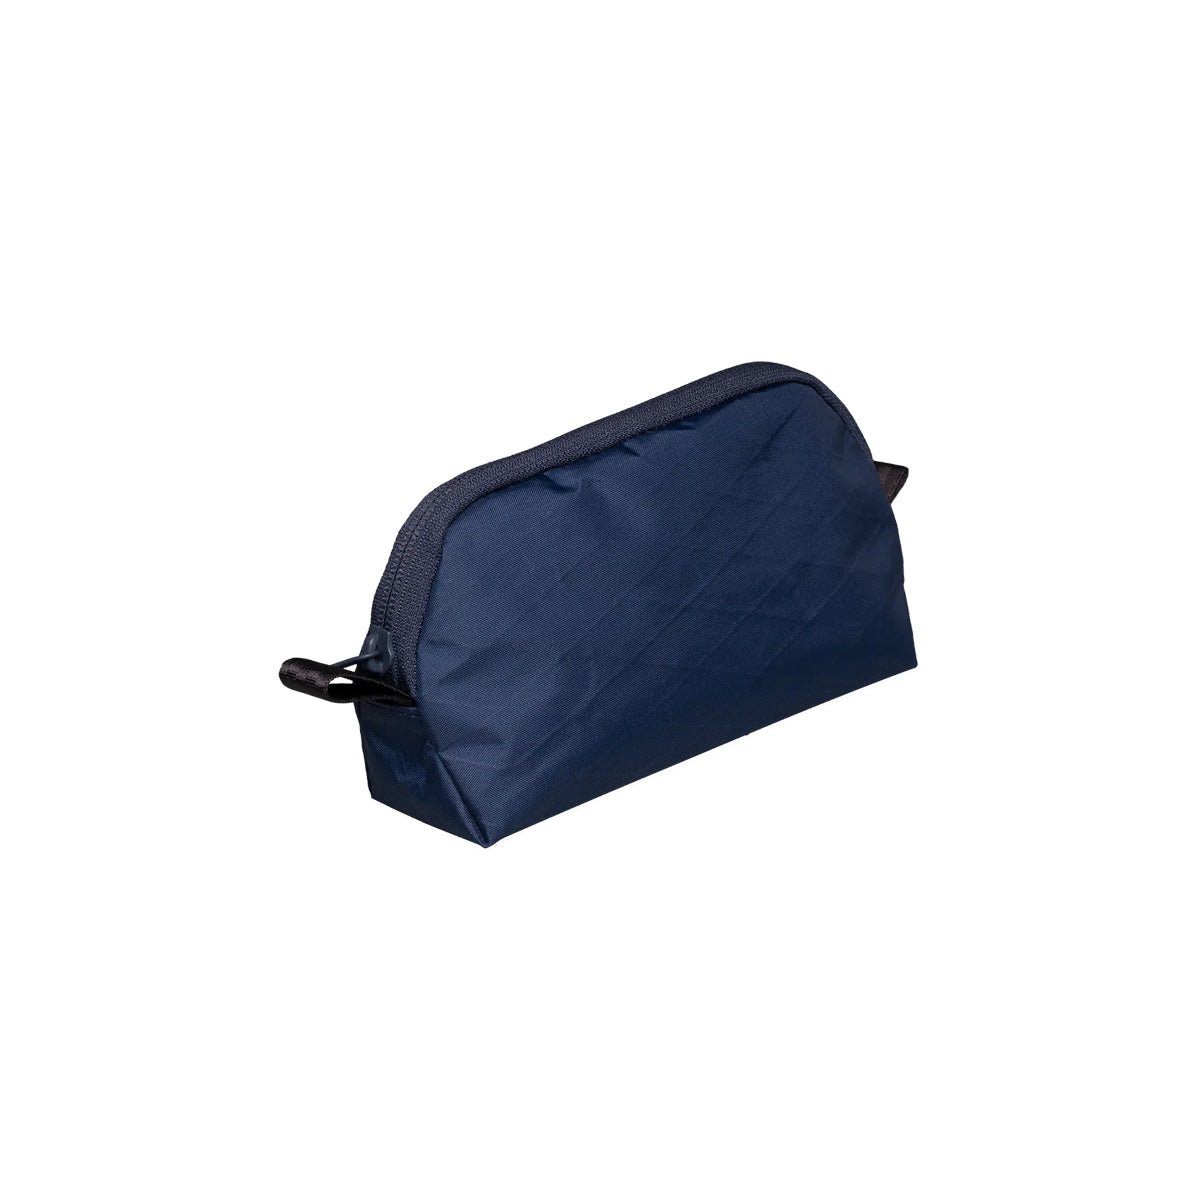 [PO] Able Carry : The Daily Stash Pouch : X-Pac Navy Blue (VX21)